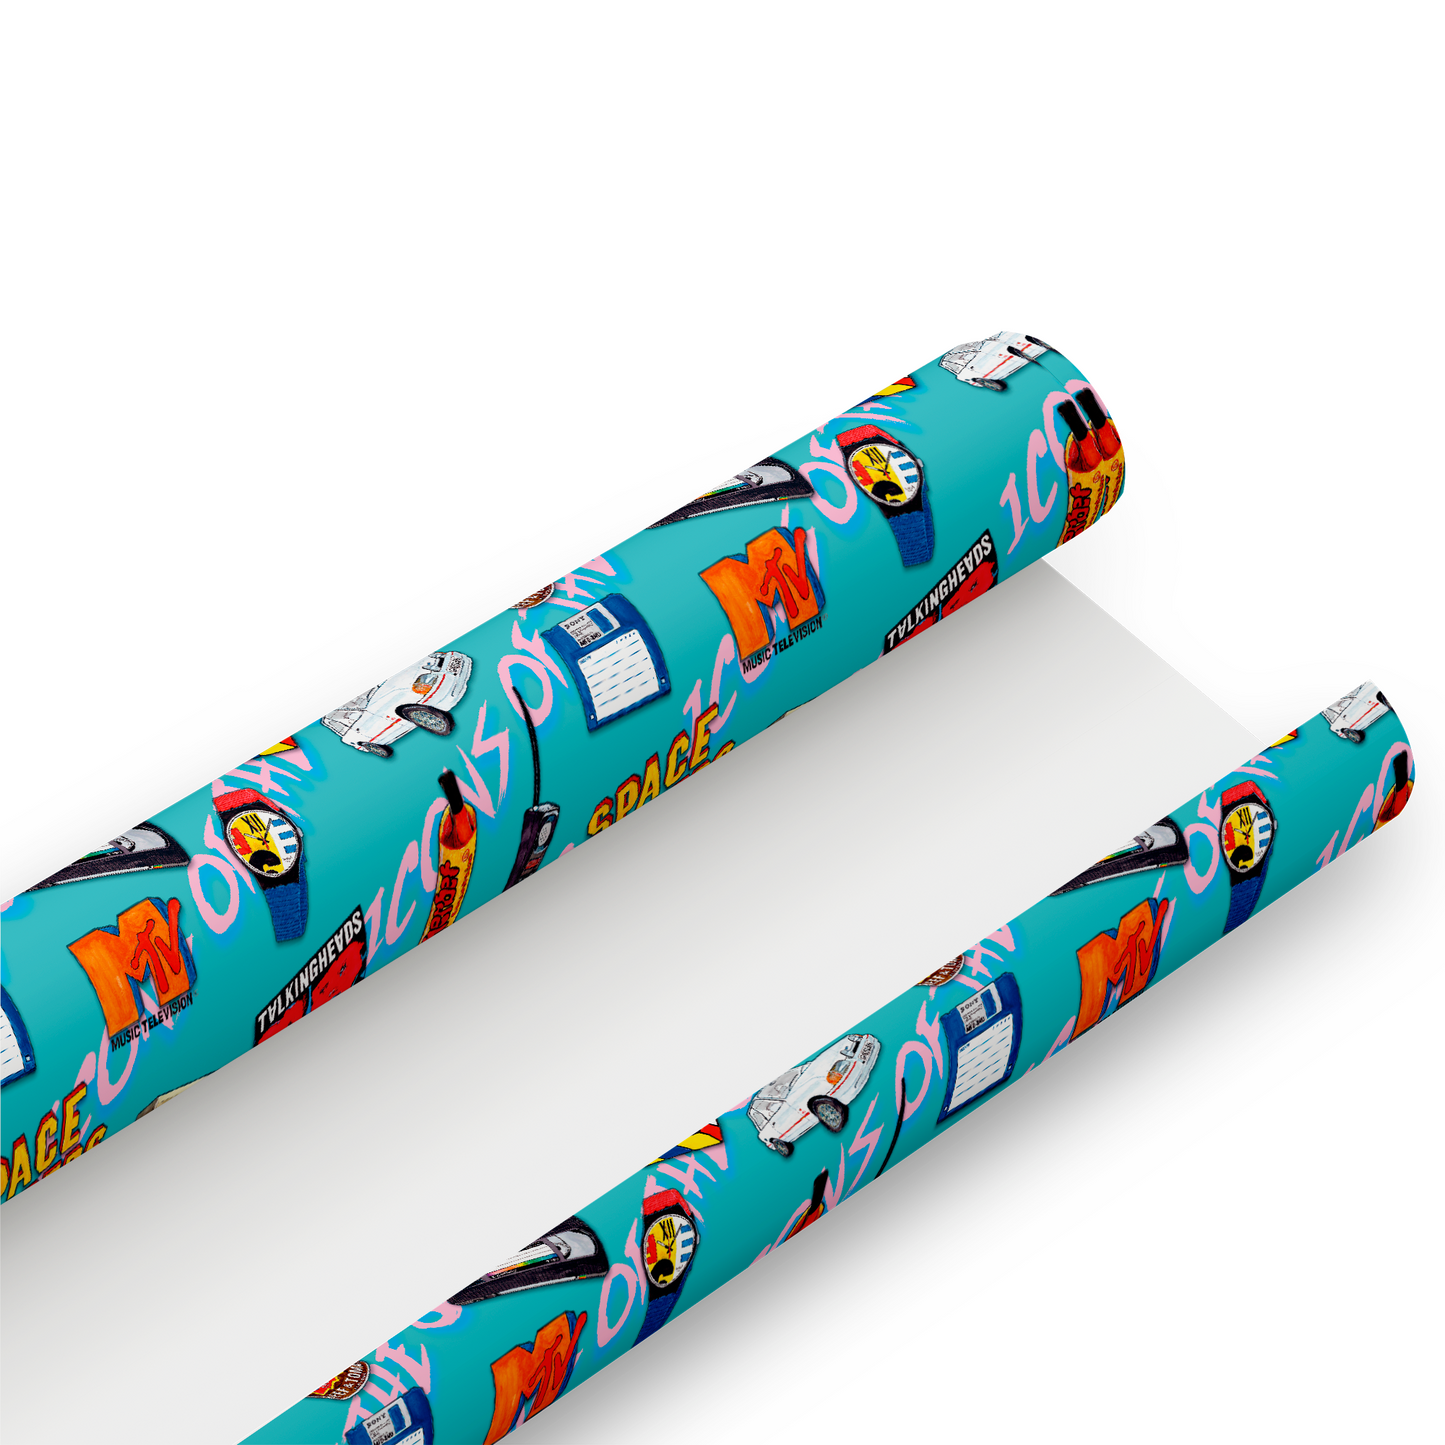 80's Retro Gift Wrap and Matching 'Sinclair' Gift Tag - Rolled